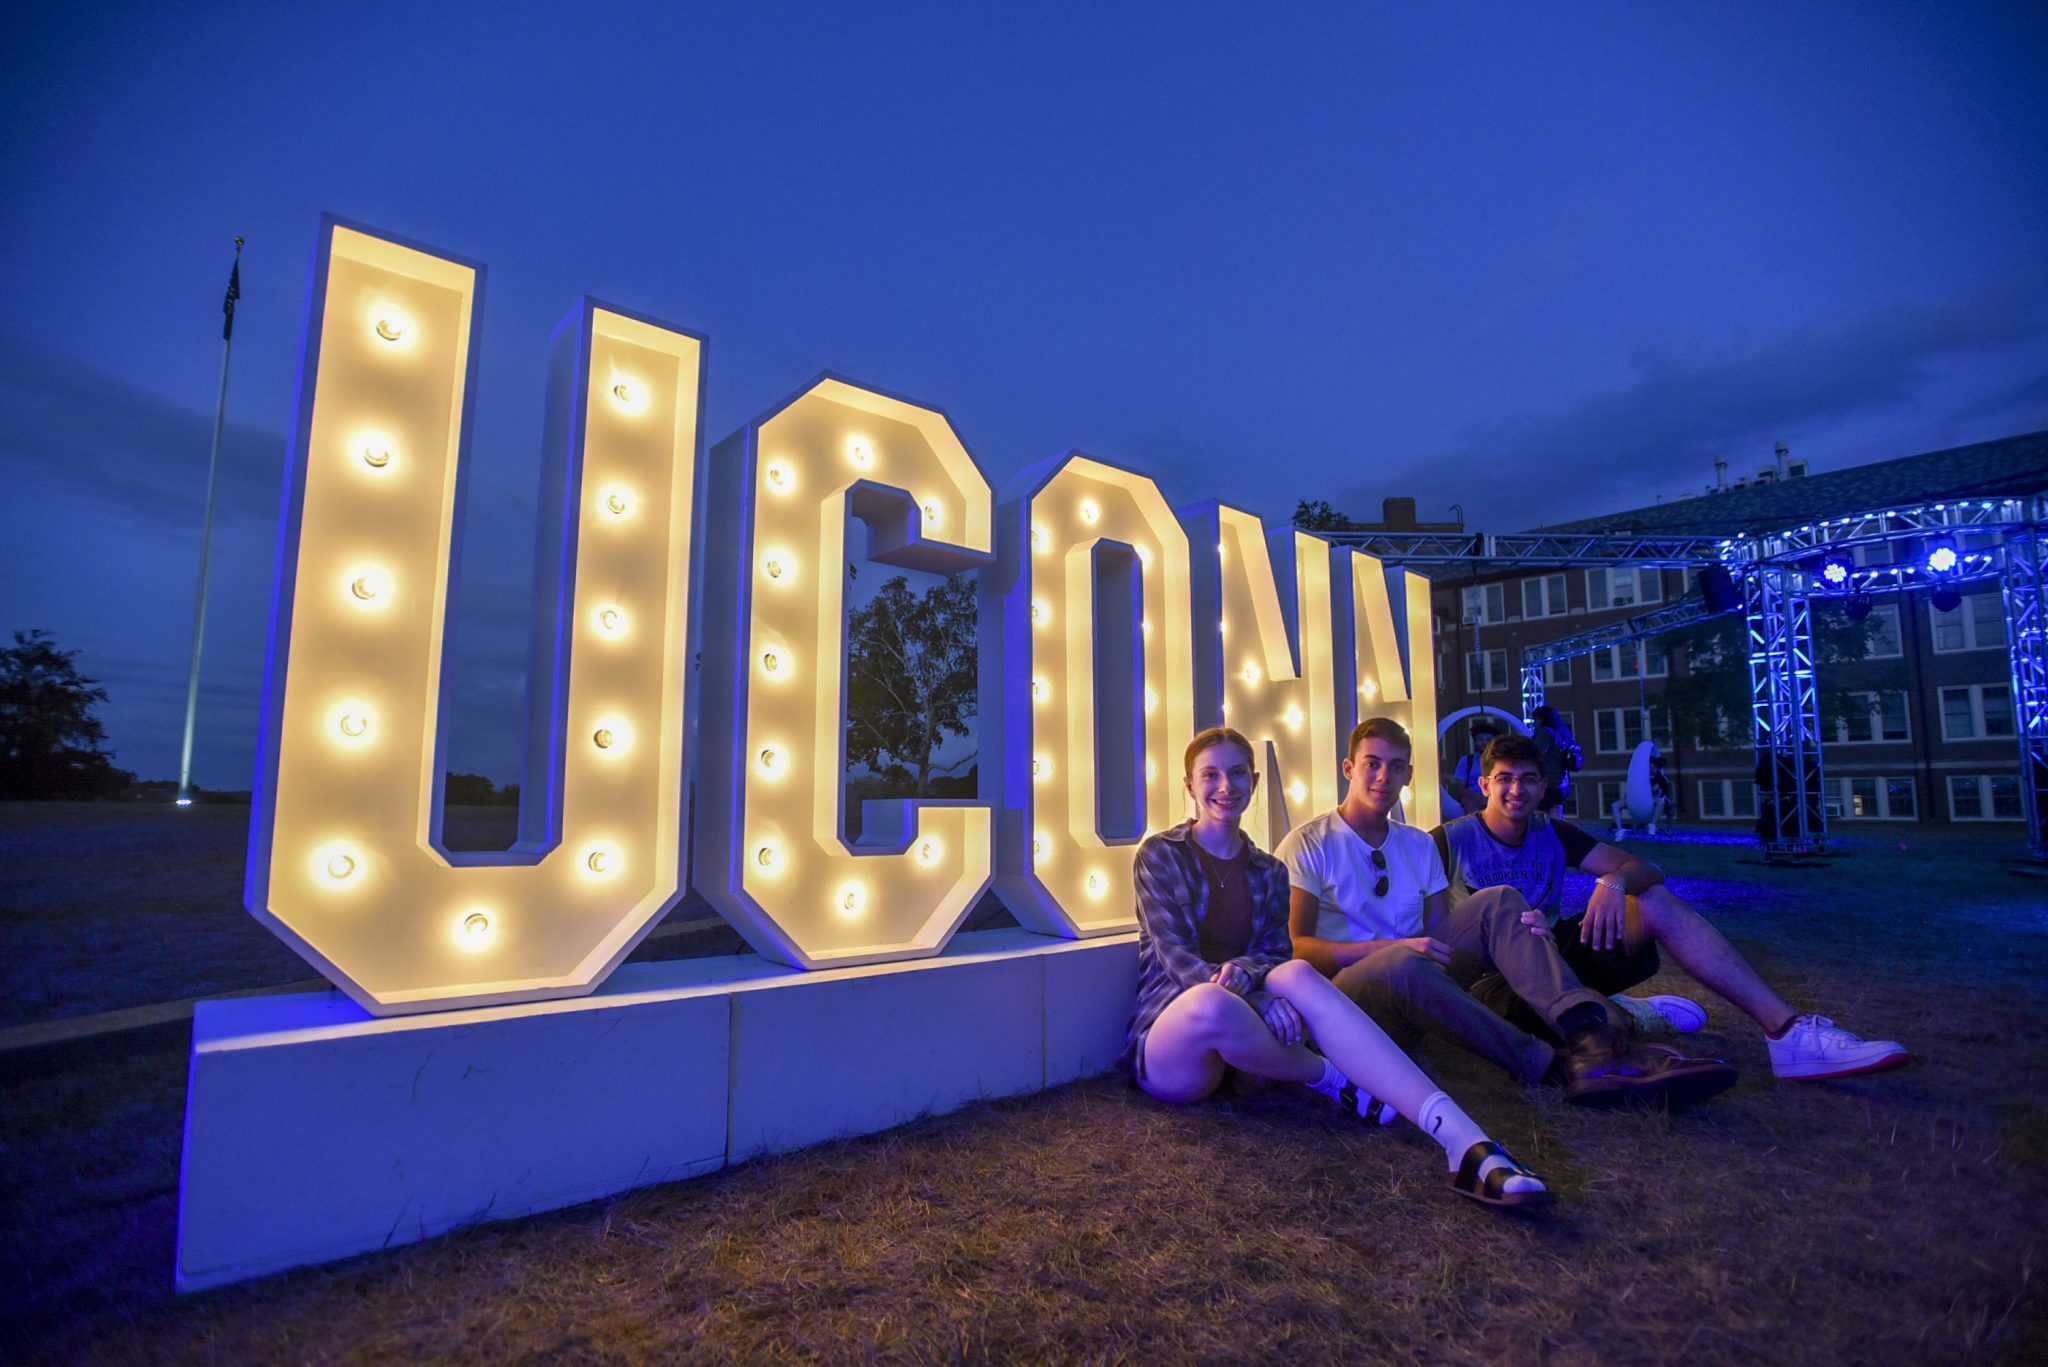 A female and two male students sit on the ground, smiling at the camera, in front of a lighted "UCONN" sign at dusk, with a dark blue sky above and blue lights shining from a large metal rig in the background.